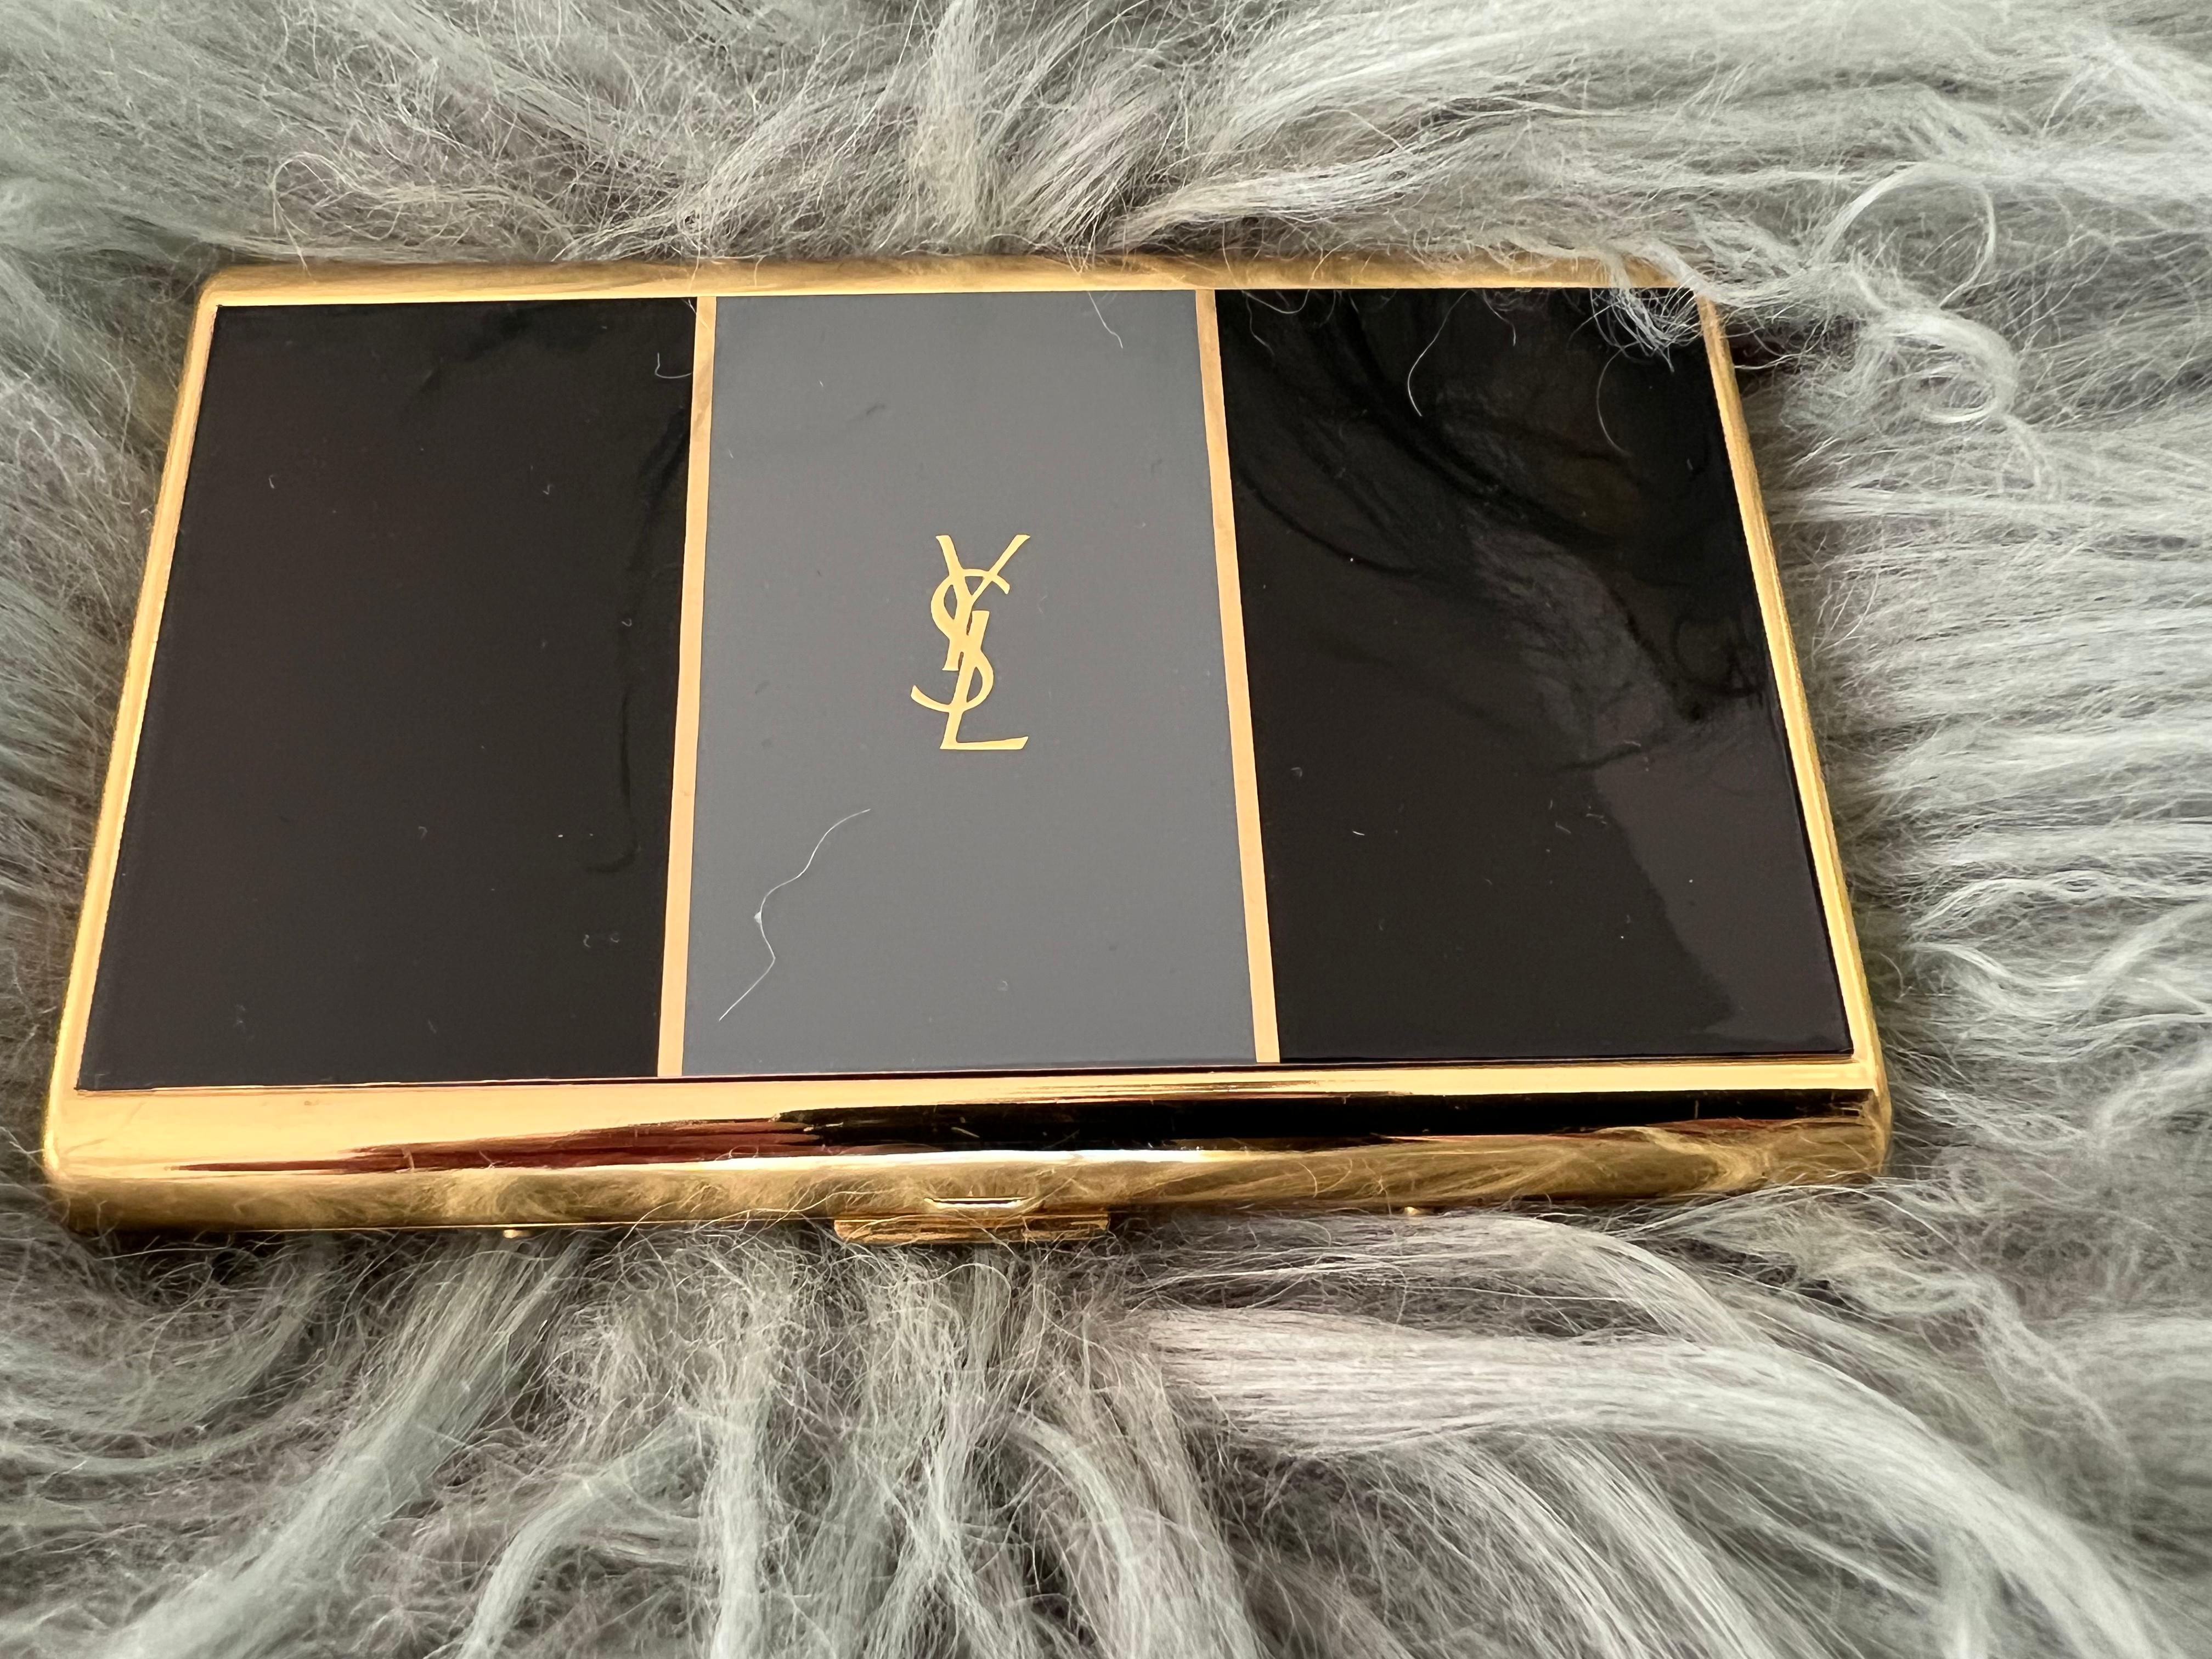 “YSL” Yves Saint Laurent retro cigarette case 
Logo Cigarette Case Gold Black Blue
The case is in mint condition. It has never been used. 
The clasp snaps as new. 
Retro. 
1970s
Gold plated. 
Signed YSL.
Very elegant and perfect for a unique classic